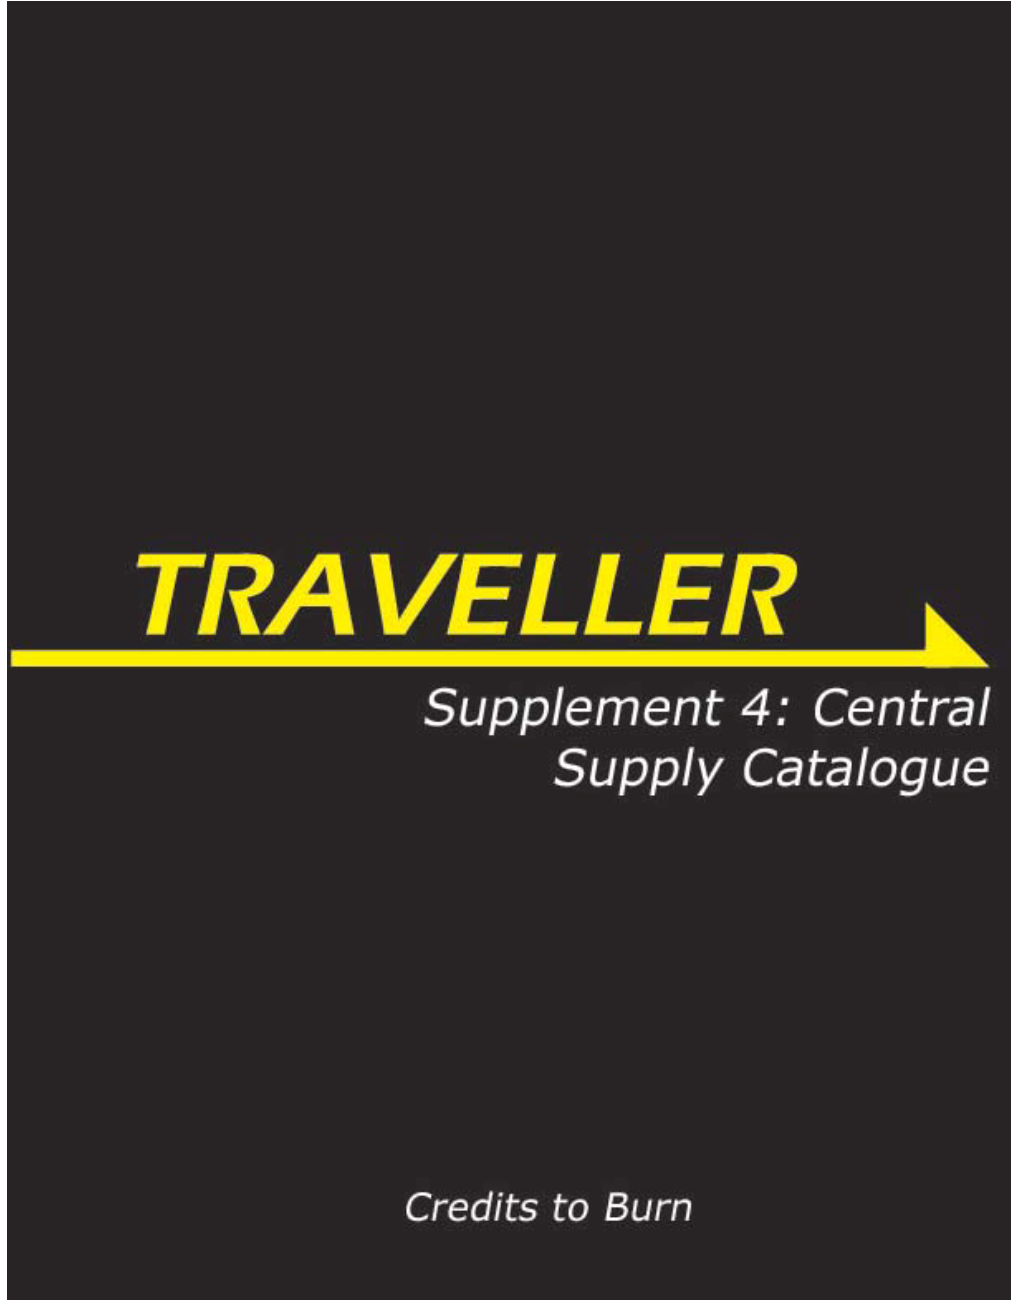 Central Supply Catalogue Ebook.Indd